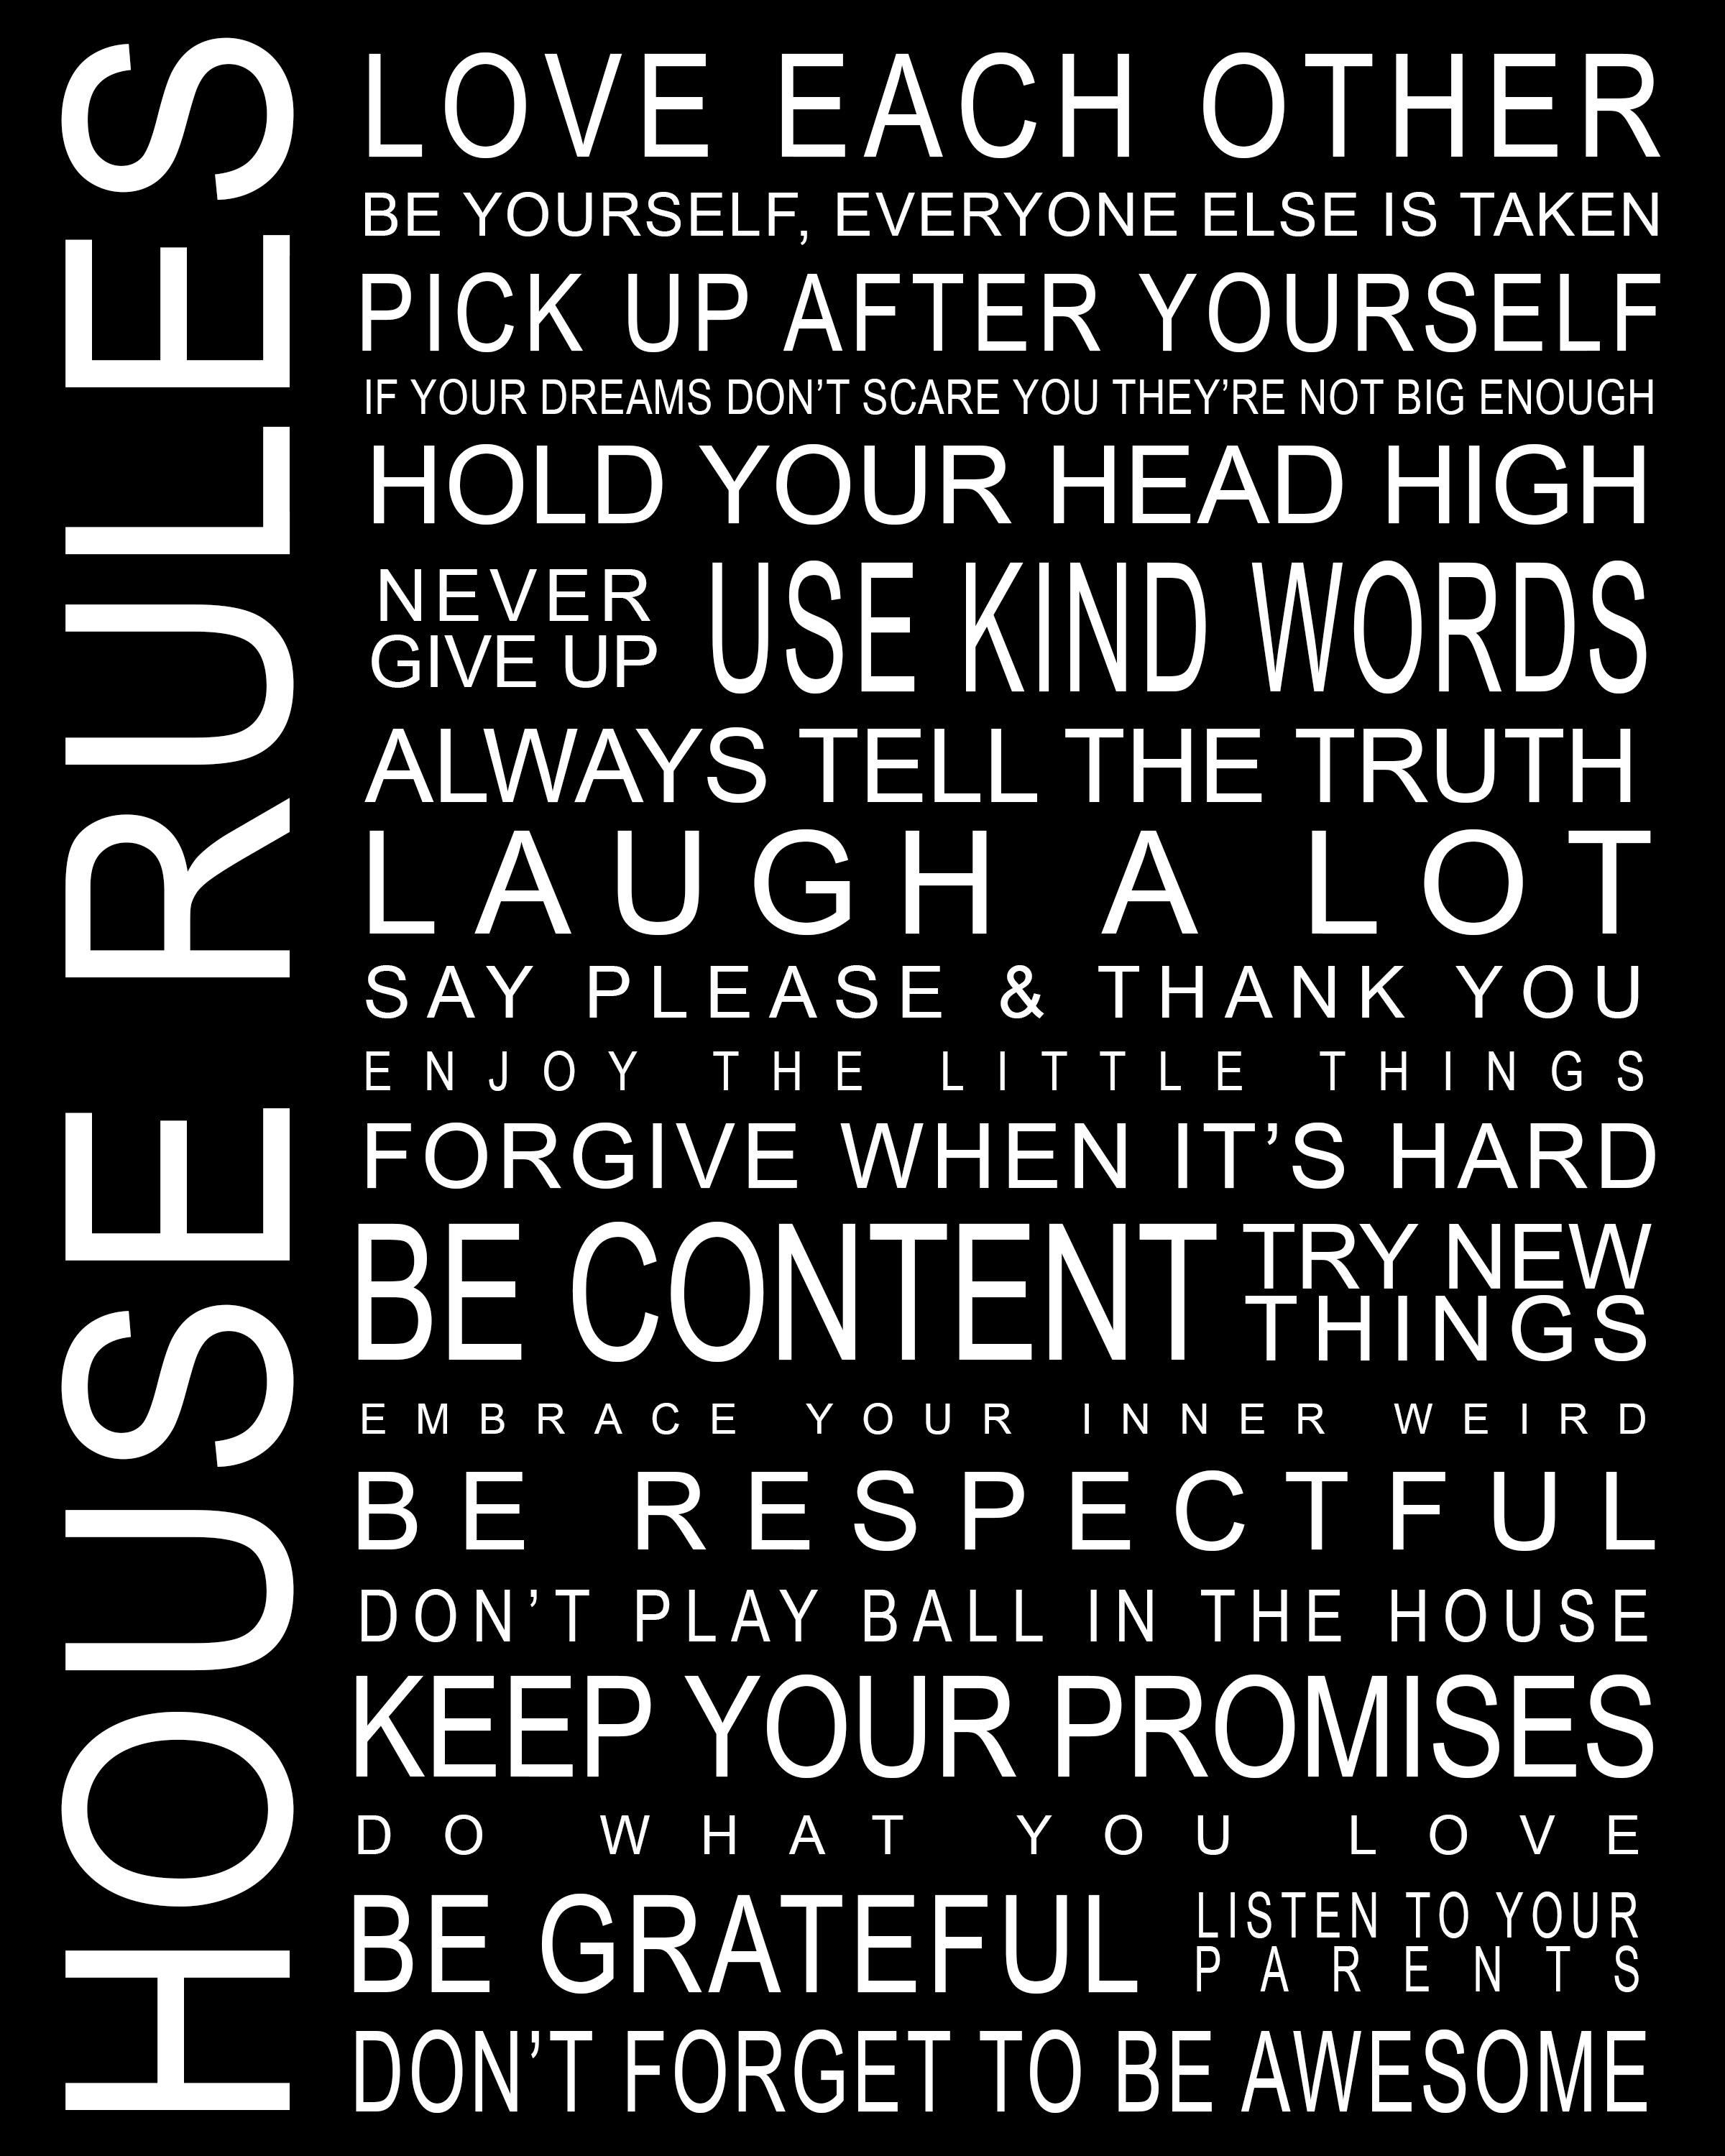 Free Printable House Rules Templates